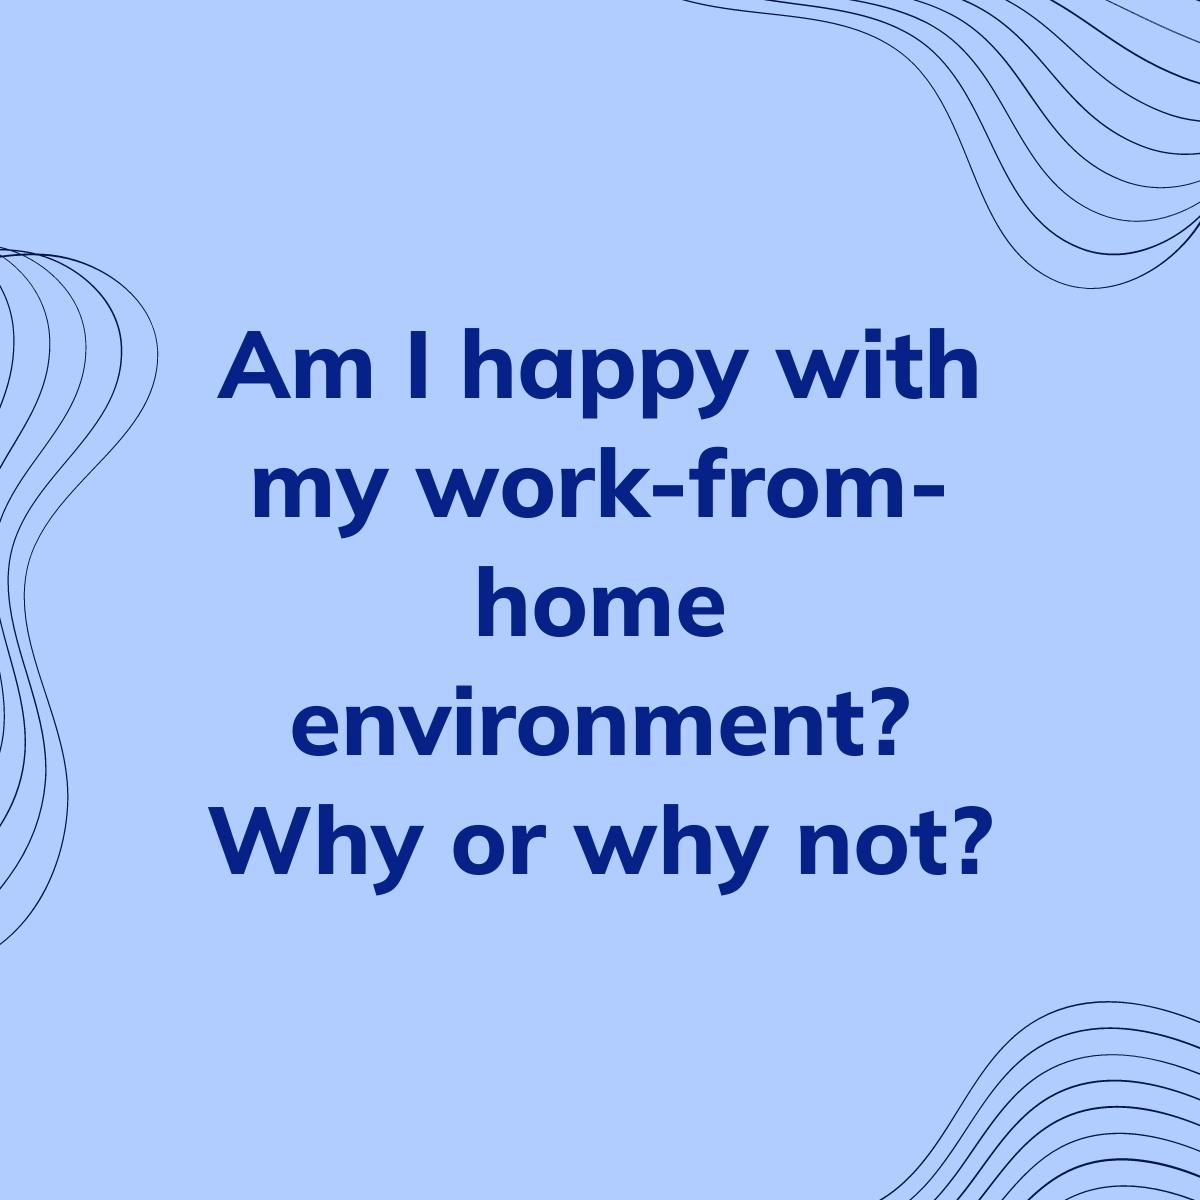 Journal Prompt: Am I happy with my work-from-home environment? Why or why not?